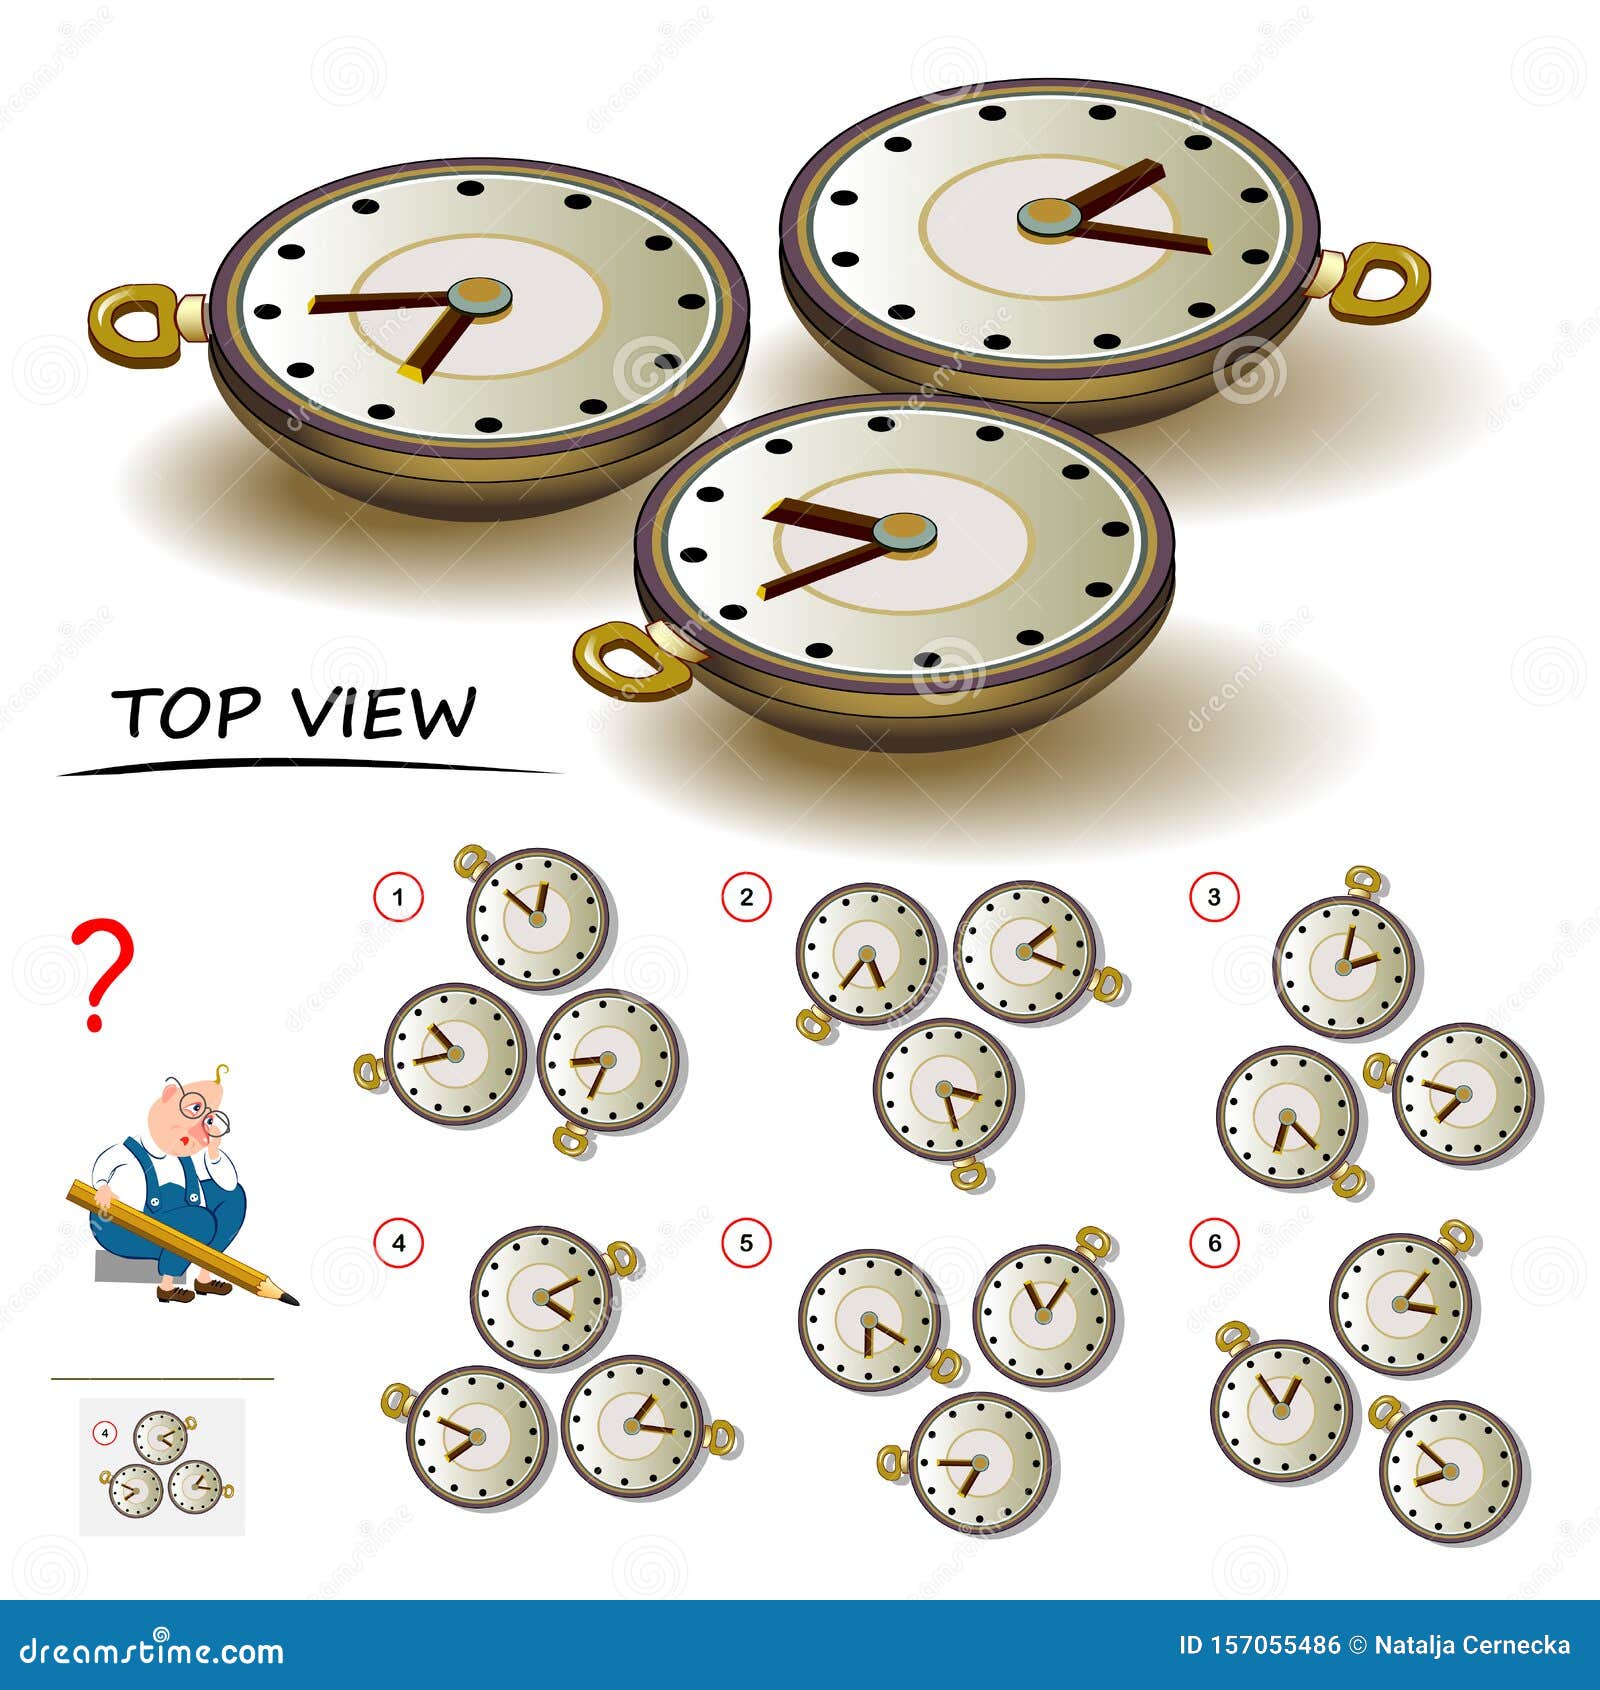 logic puzzle game for children and adults. need to find correct top view of watch. printable page for brain teaser book.